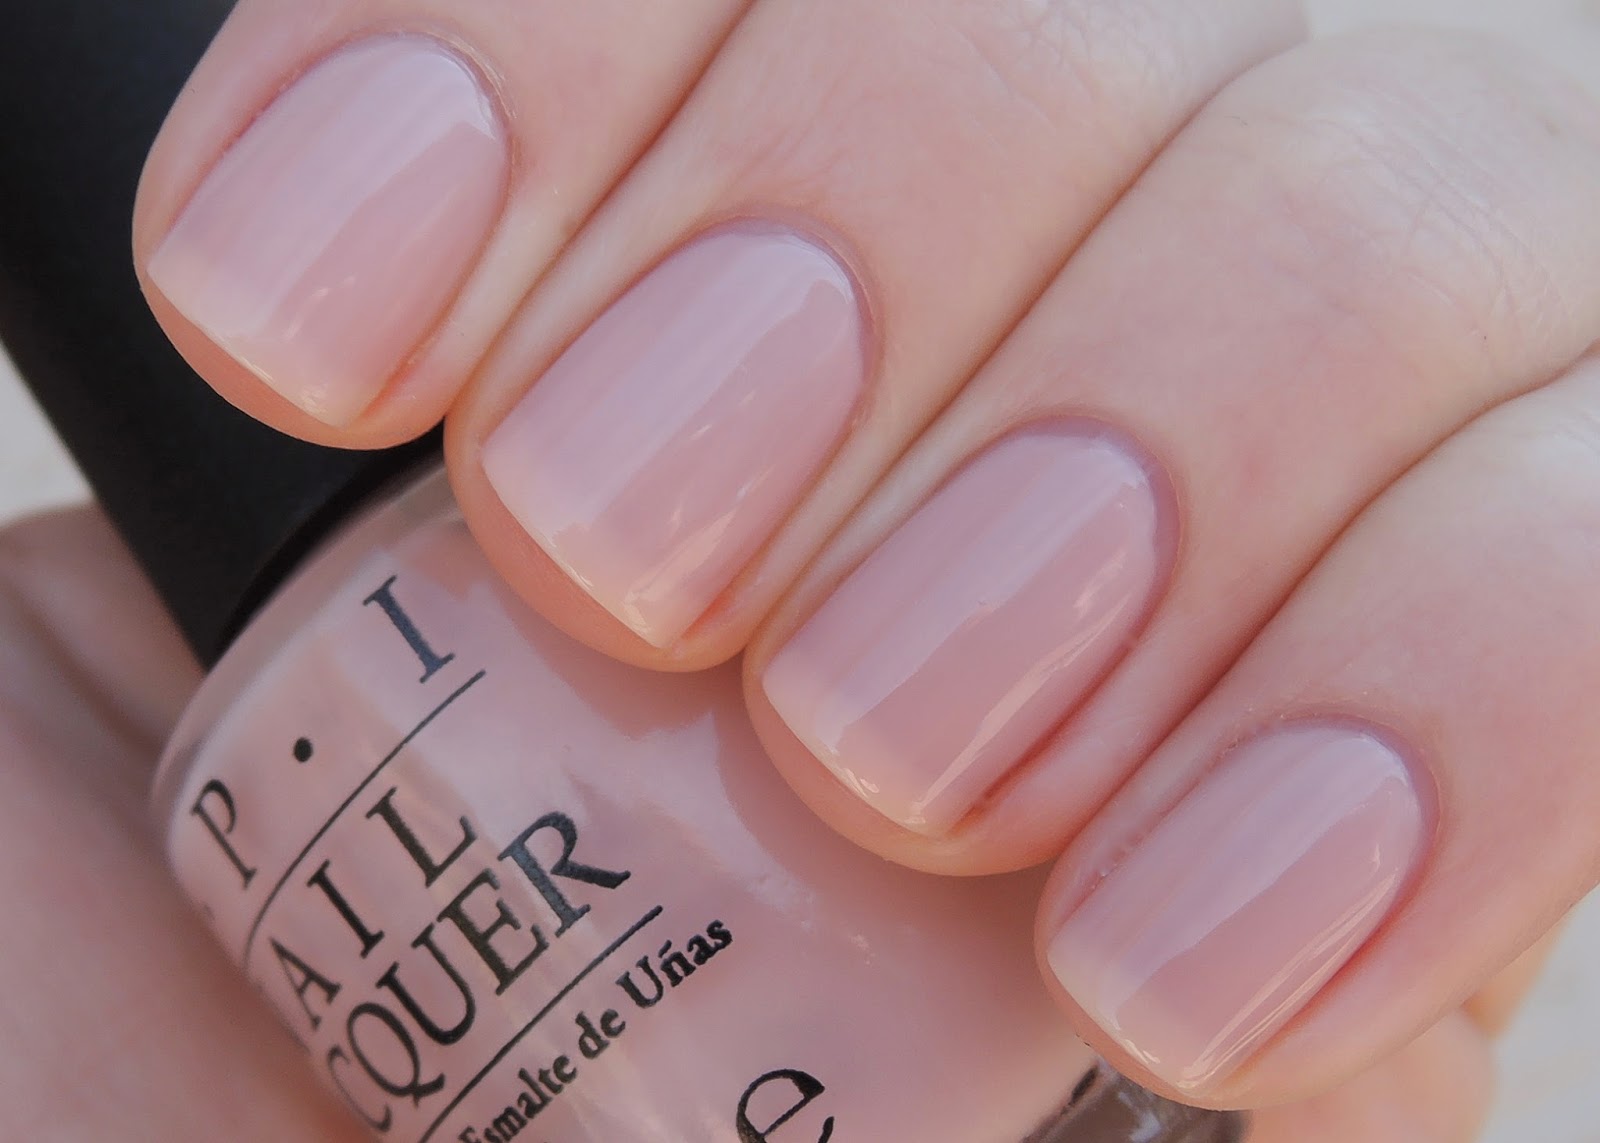 10. OPI Nail Lacquer in "Put it in Neutral" - wide 1